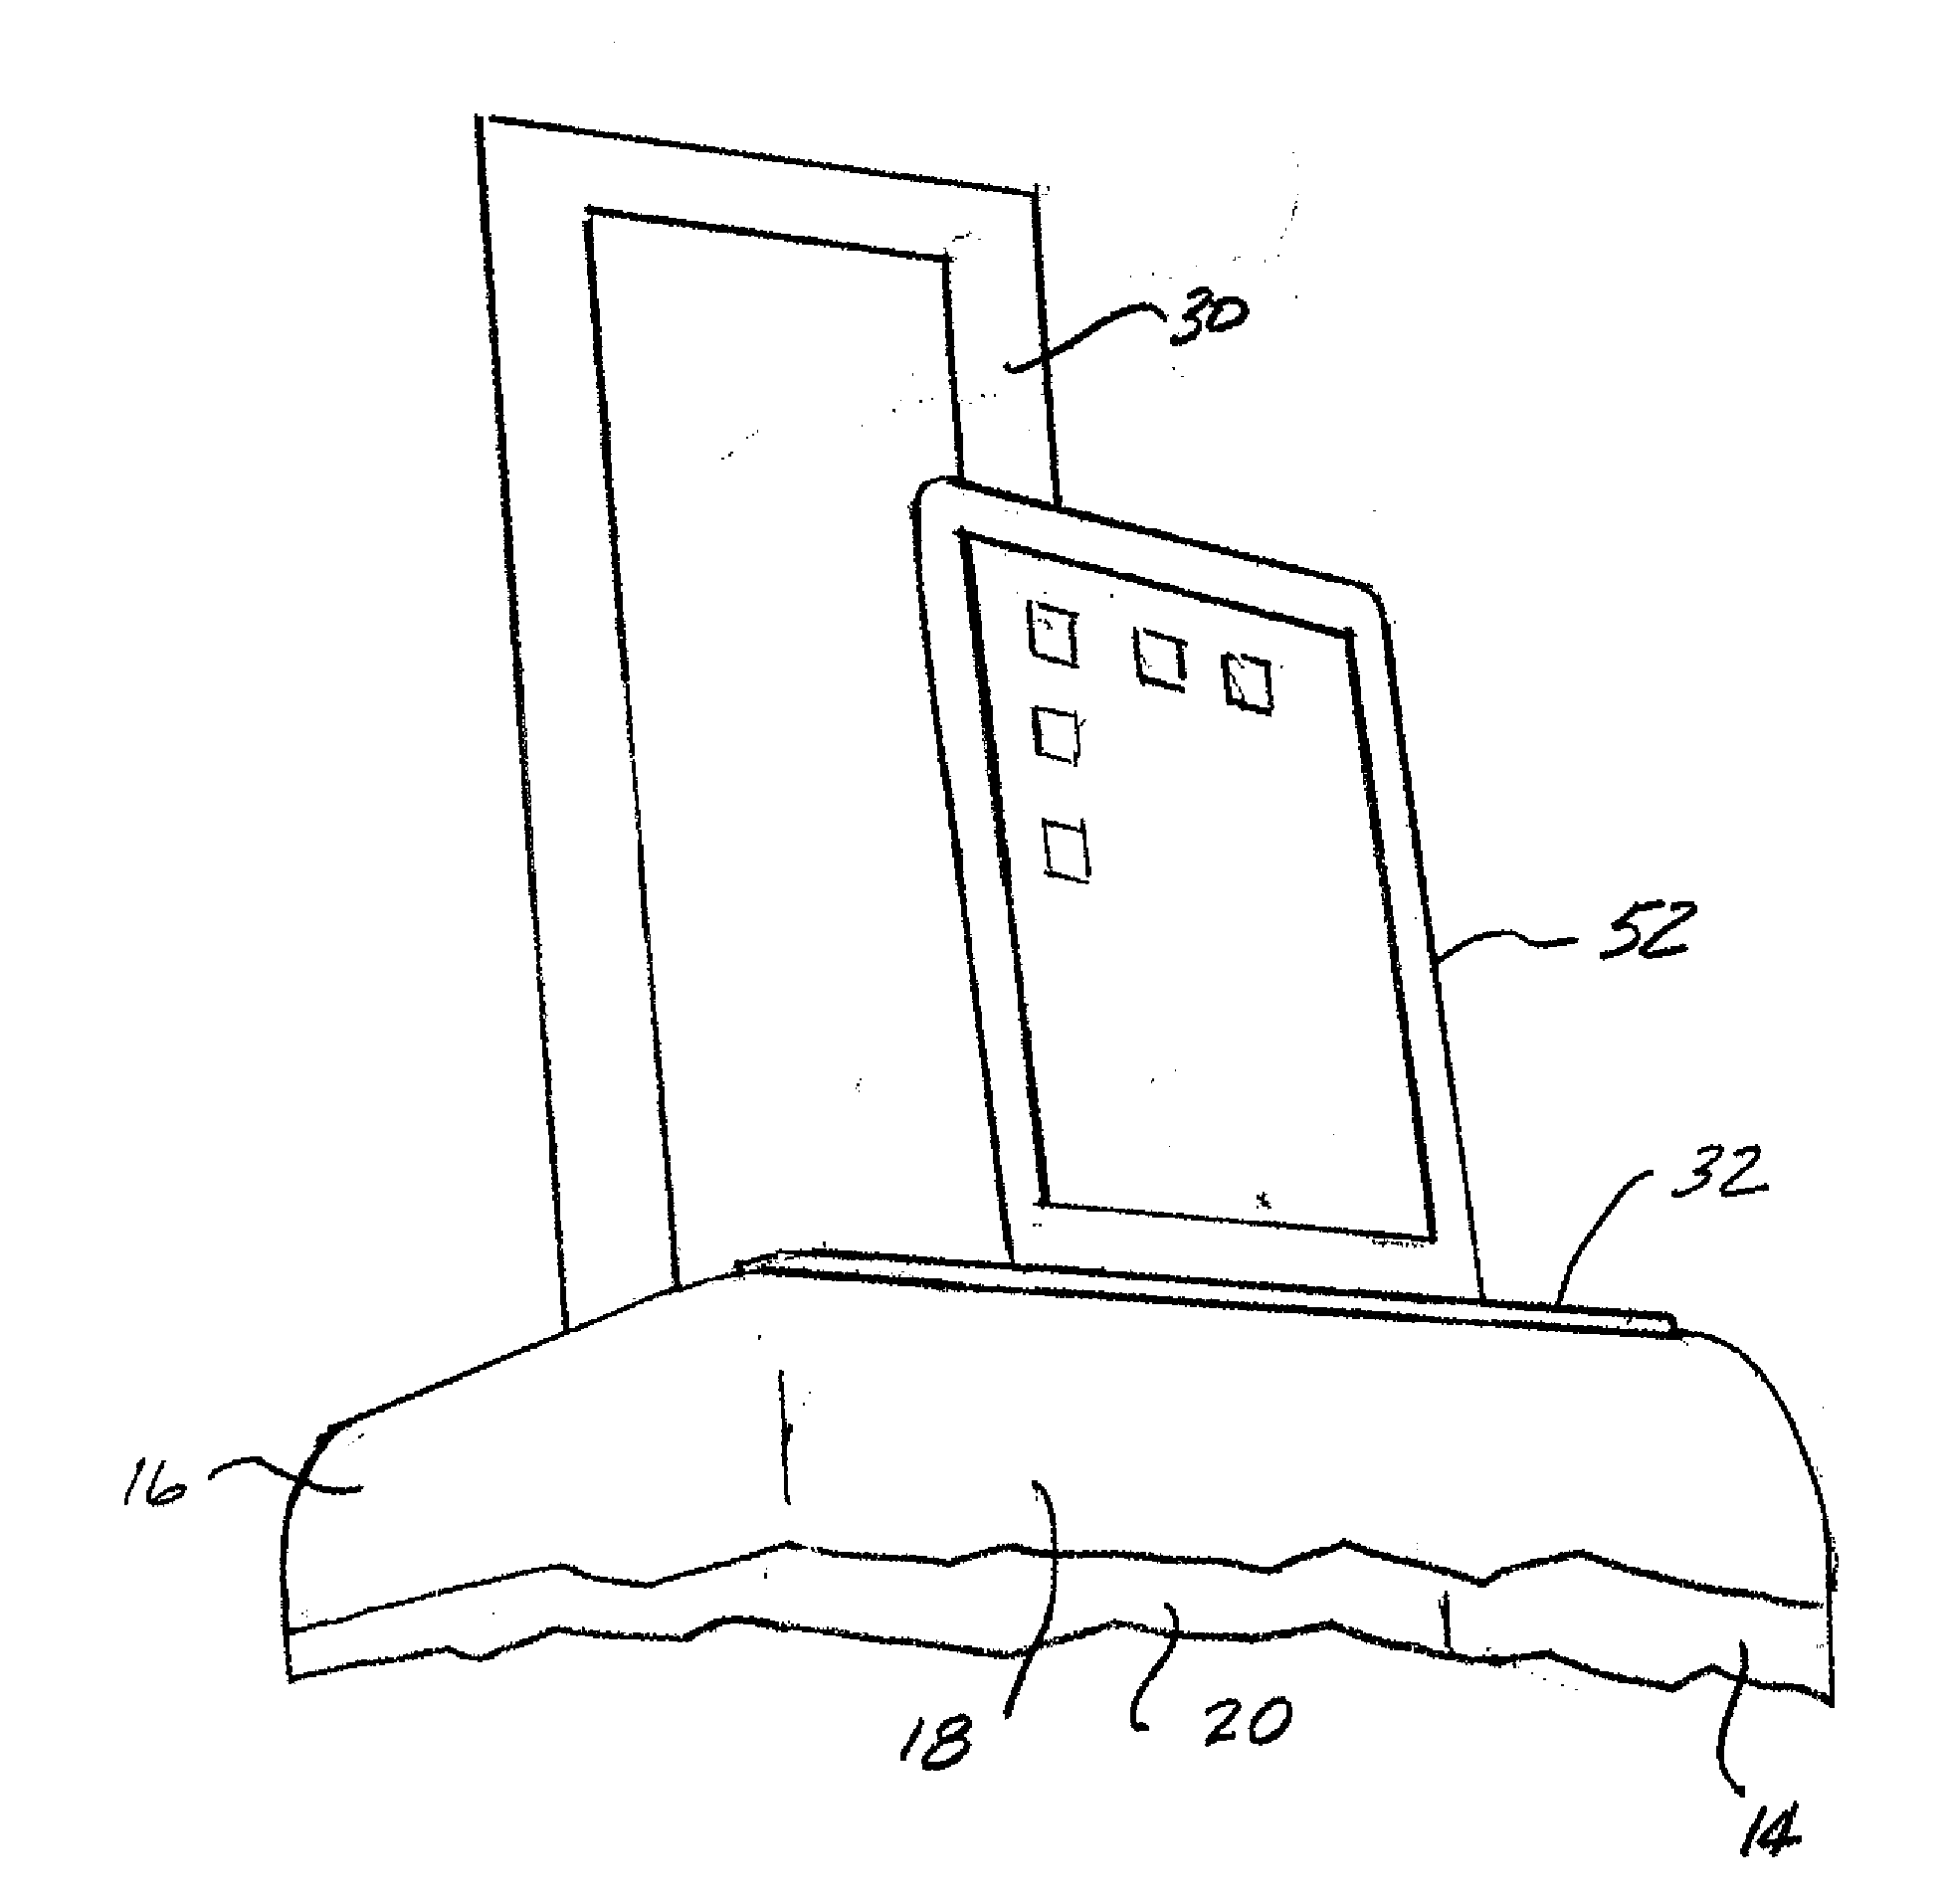 Luggage with support receptacle